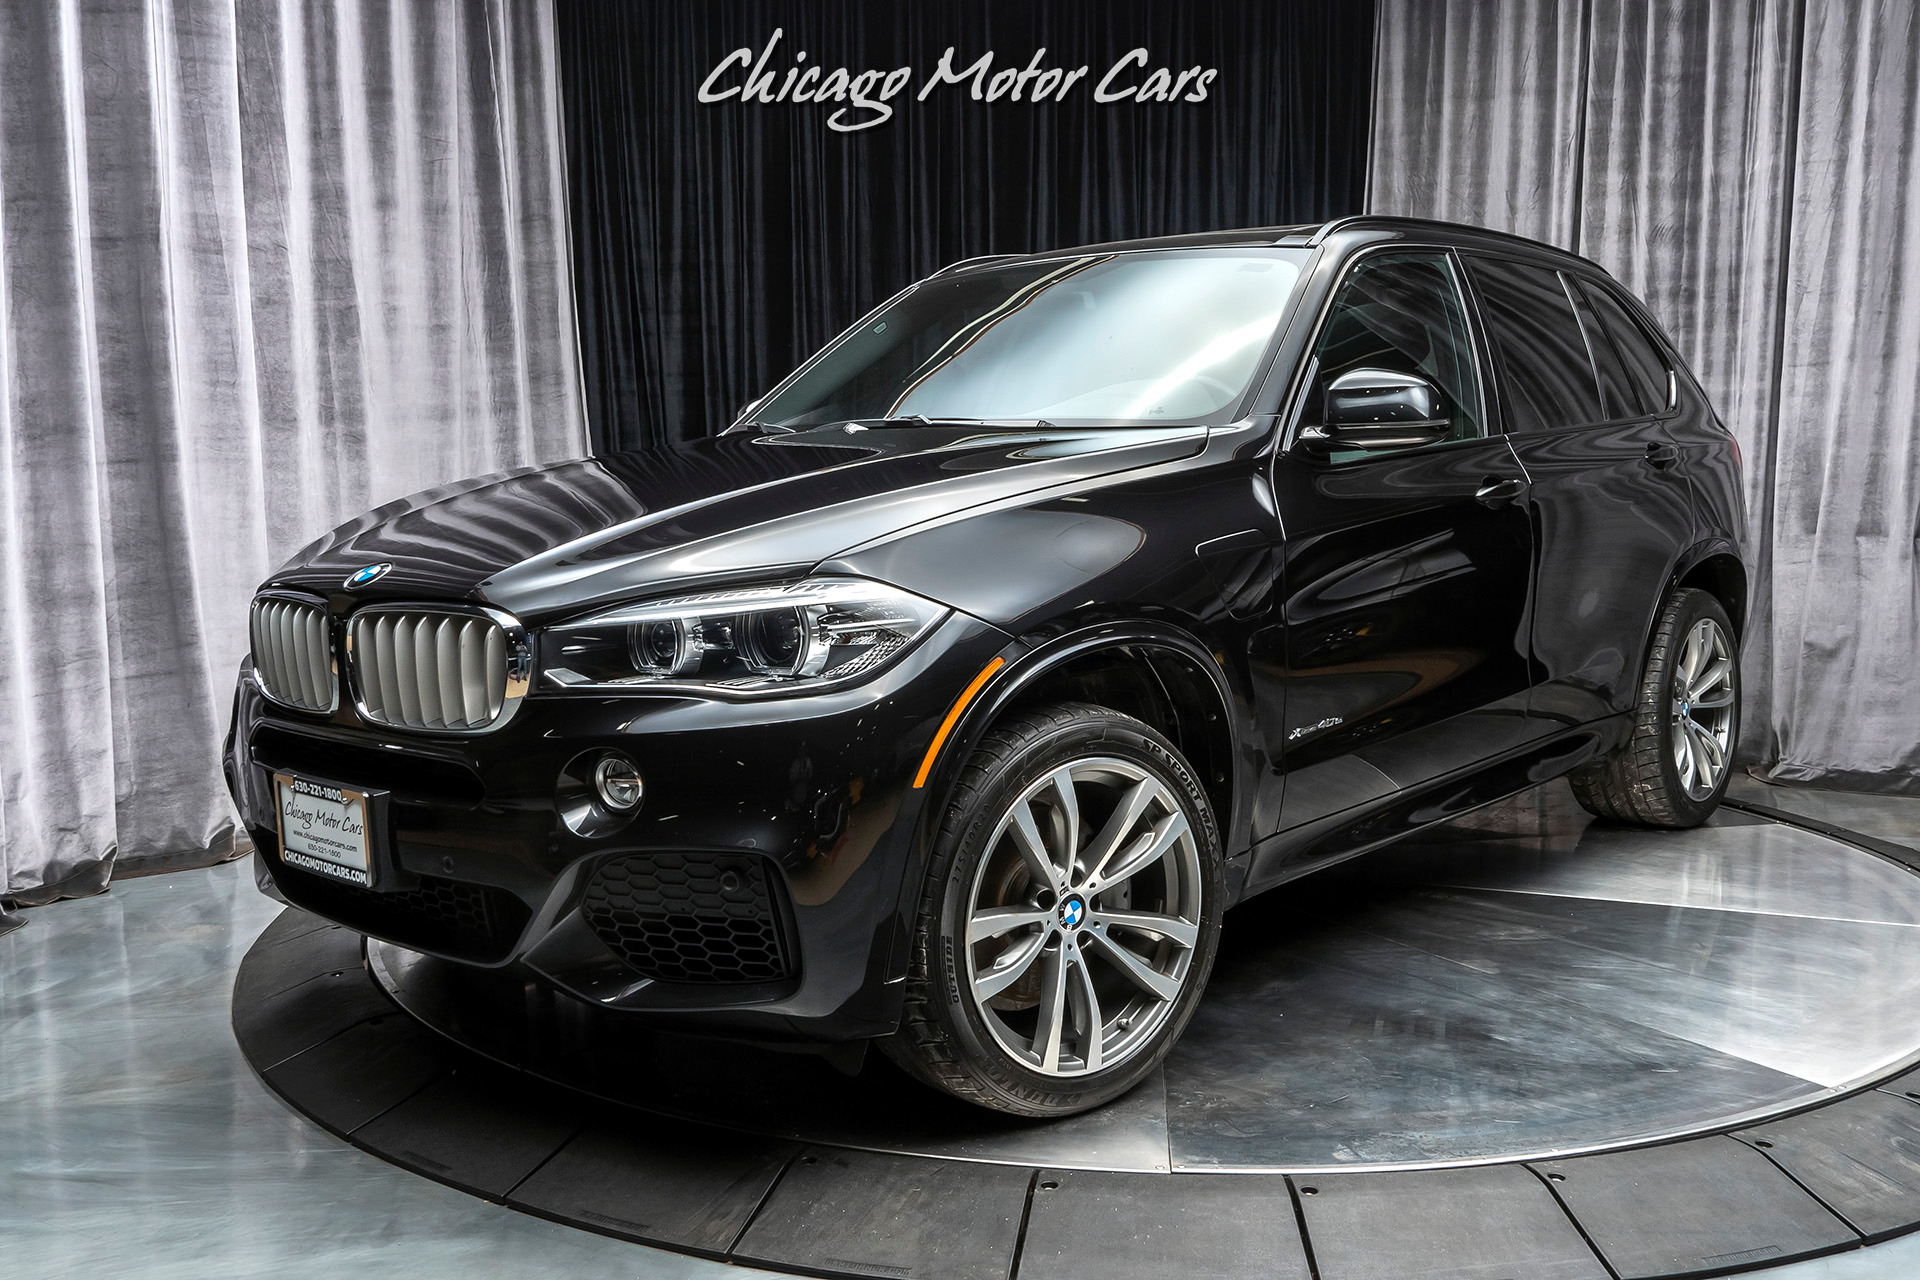 Used 2016 BMW X5 xDrive40e SUV MSRP $74K+ M-SPORT LINE! ONLY 34K MILES! For  Sale (Special Pricing) | Chicago Motor Cars Stock #16534